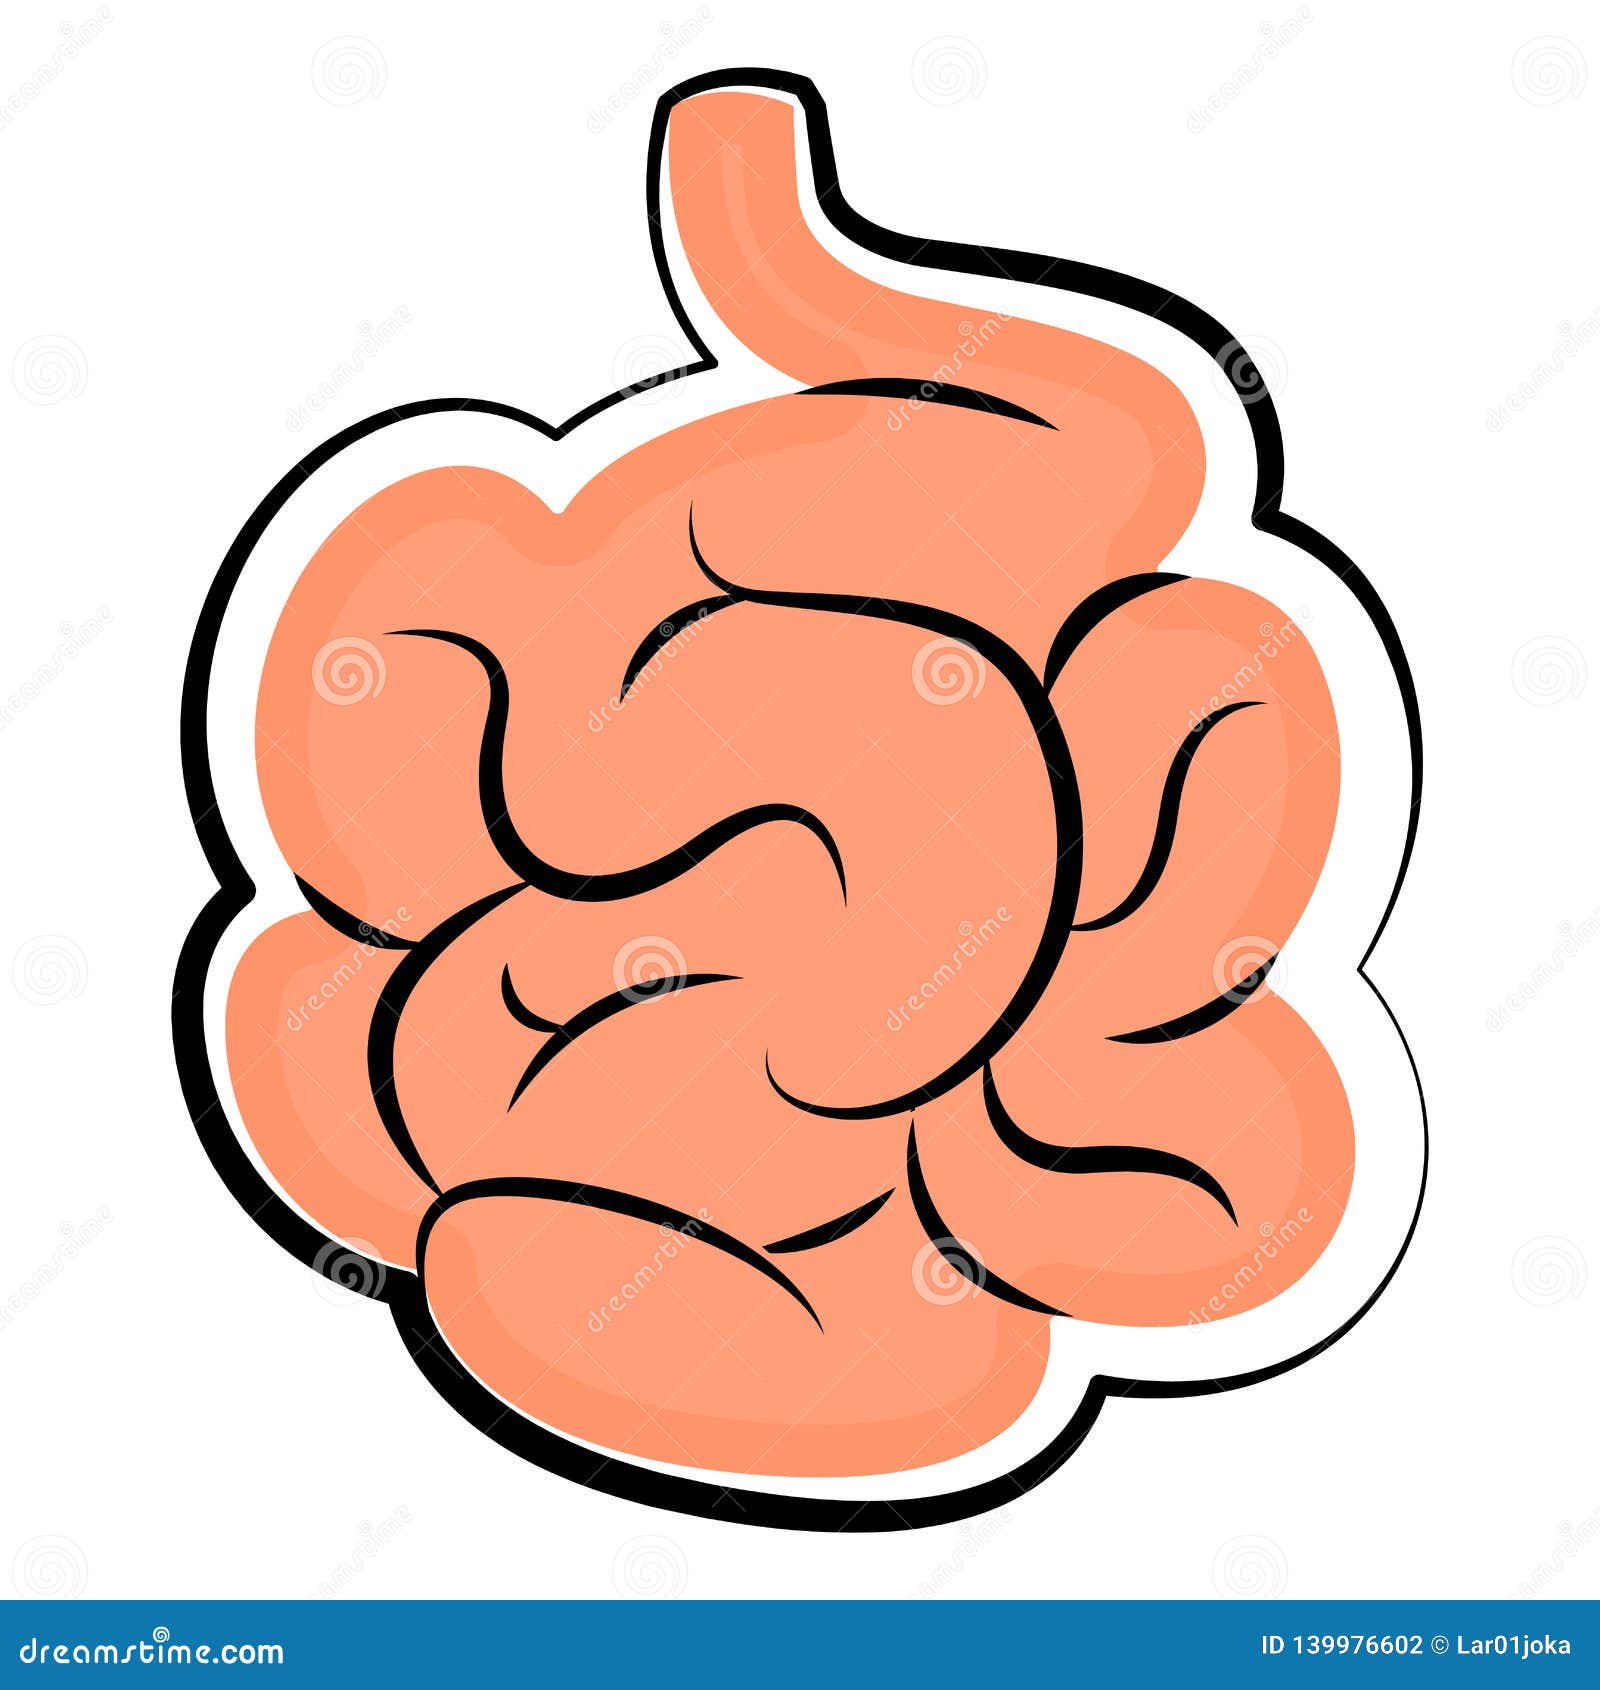 134 Small Intestine Drawing Stock Photos HighRes Pictures and Images   Getty Images